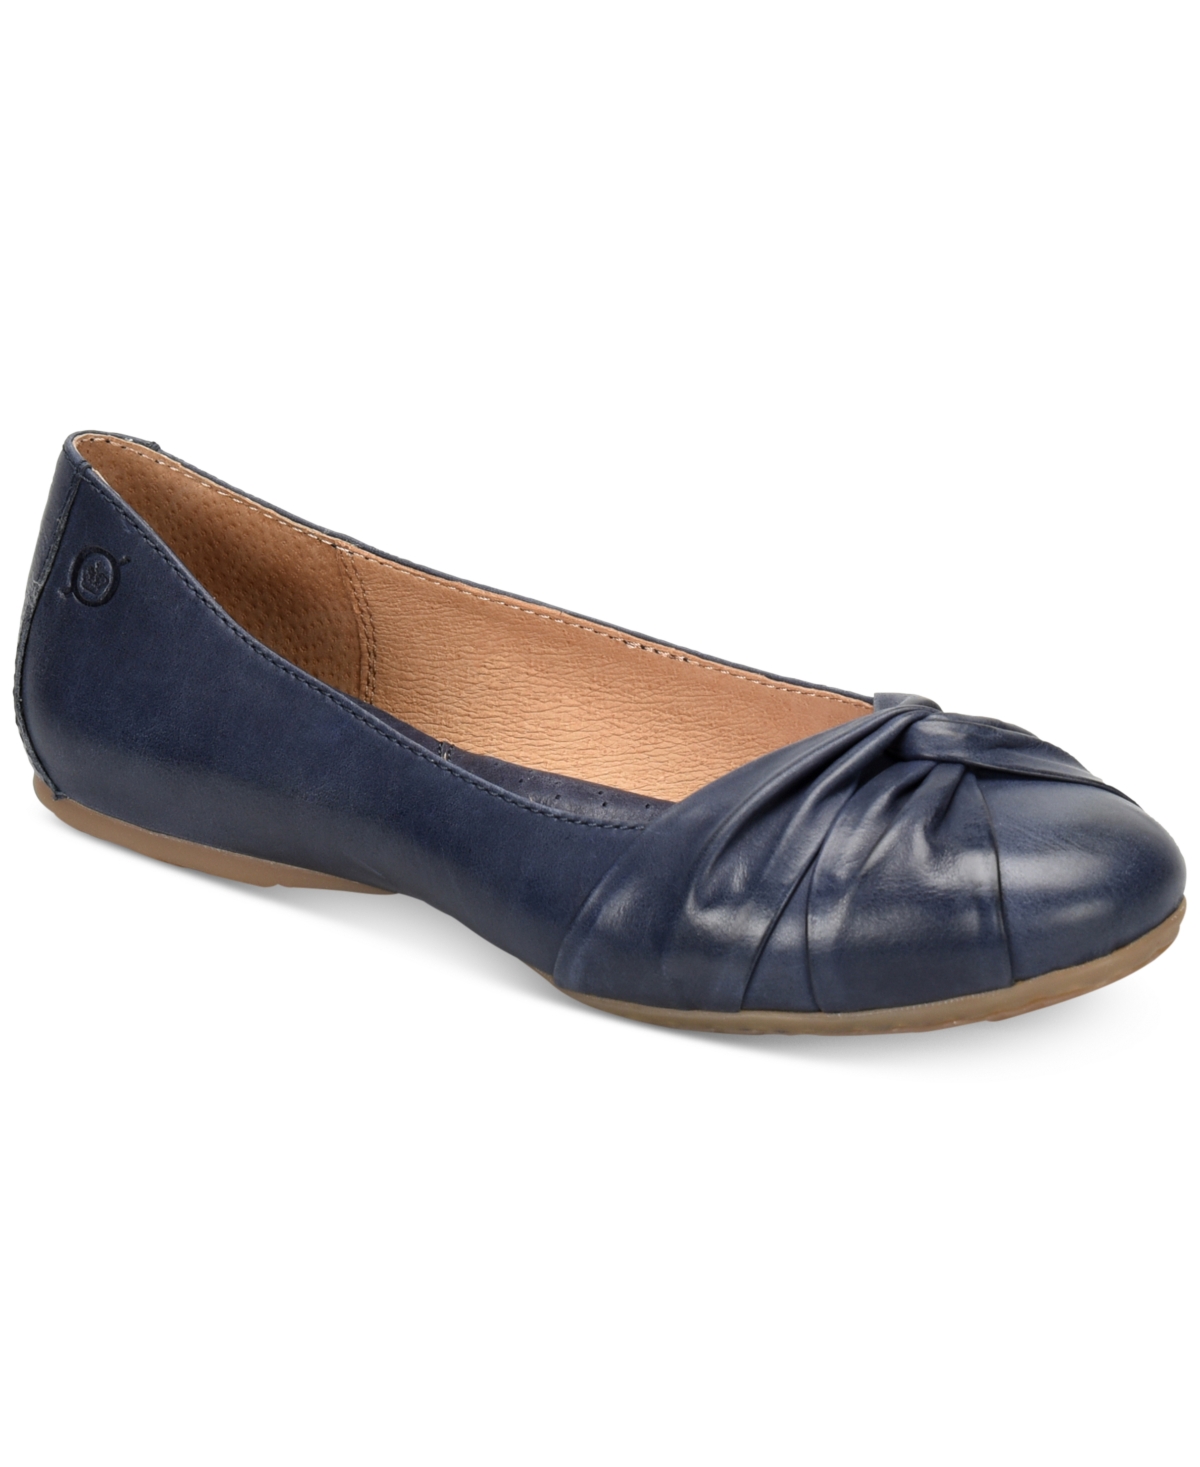 Born Lilly Flats, Created for Macy's Women's Shoes